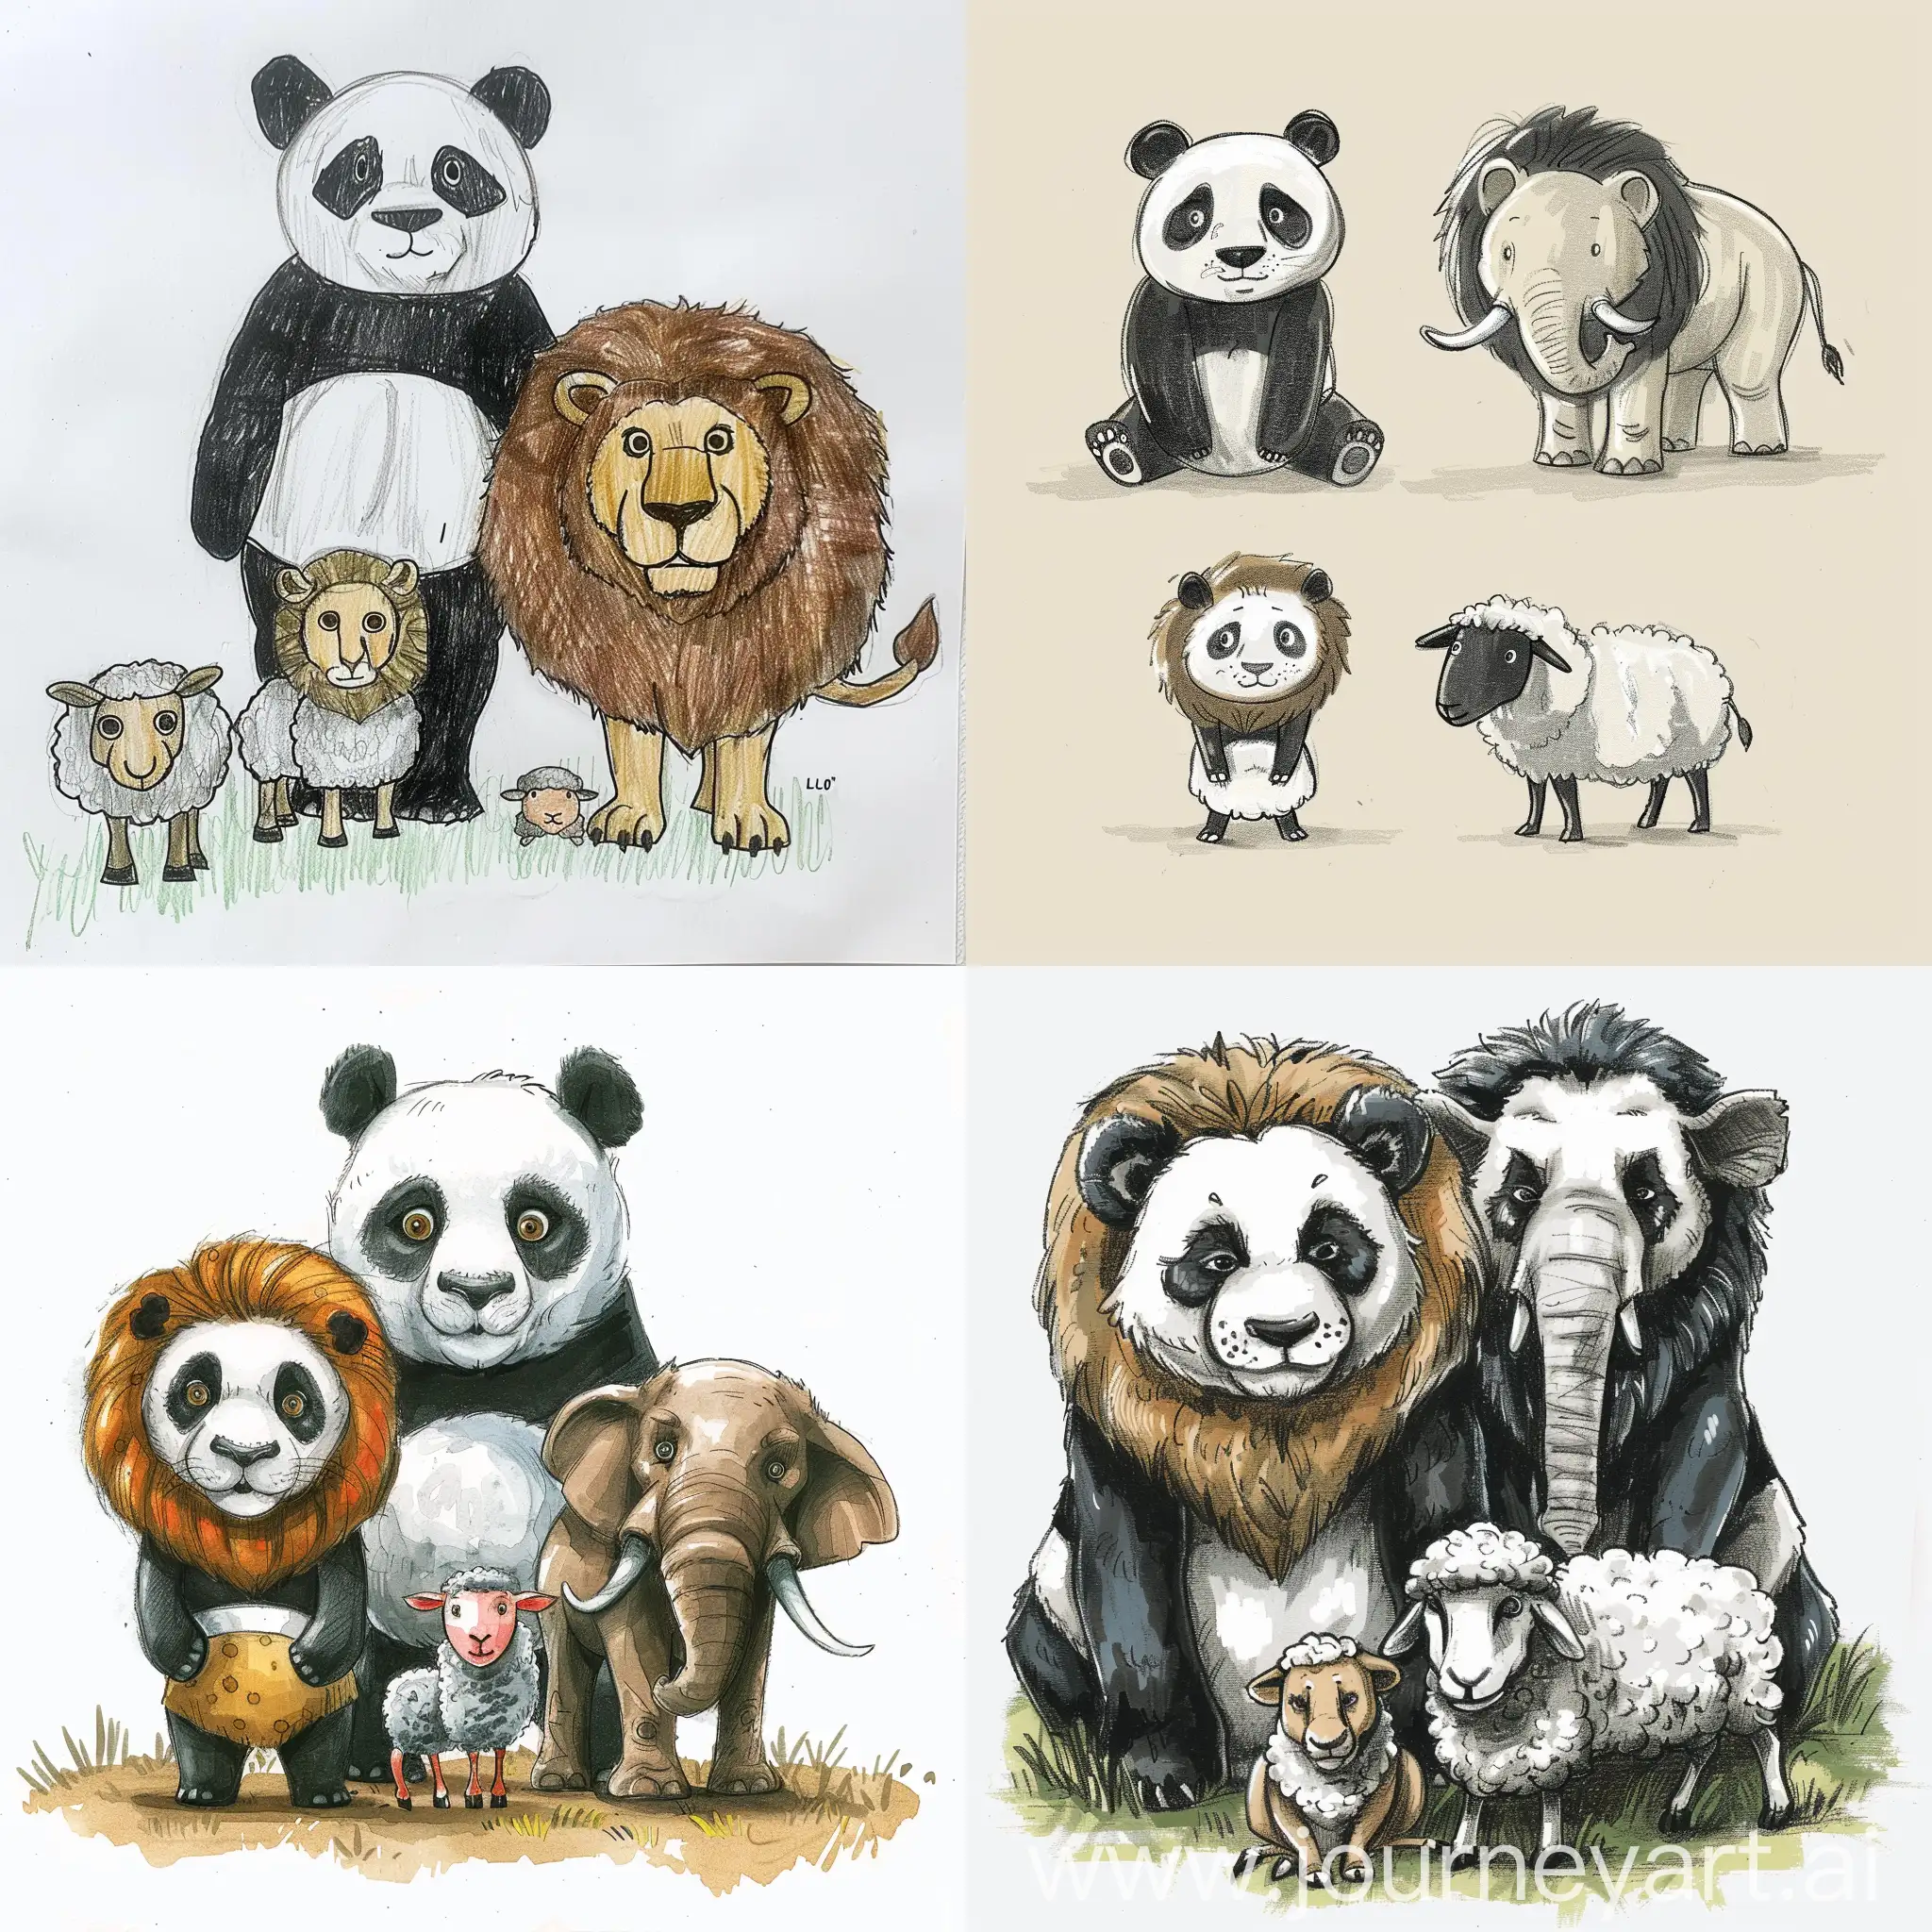 Draw 1 panda, 1 lion, 1 elephant and 1 sheep together with the same size